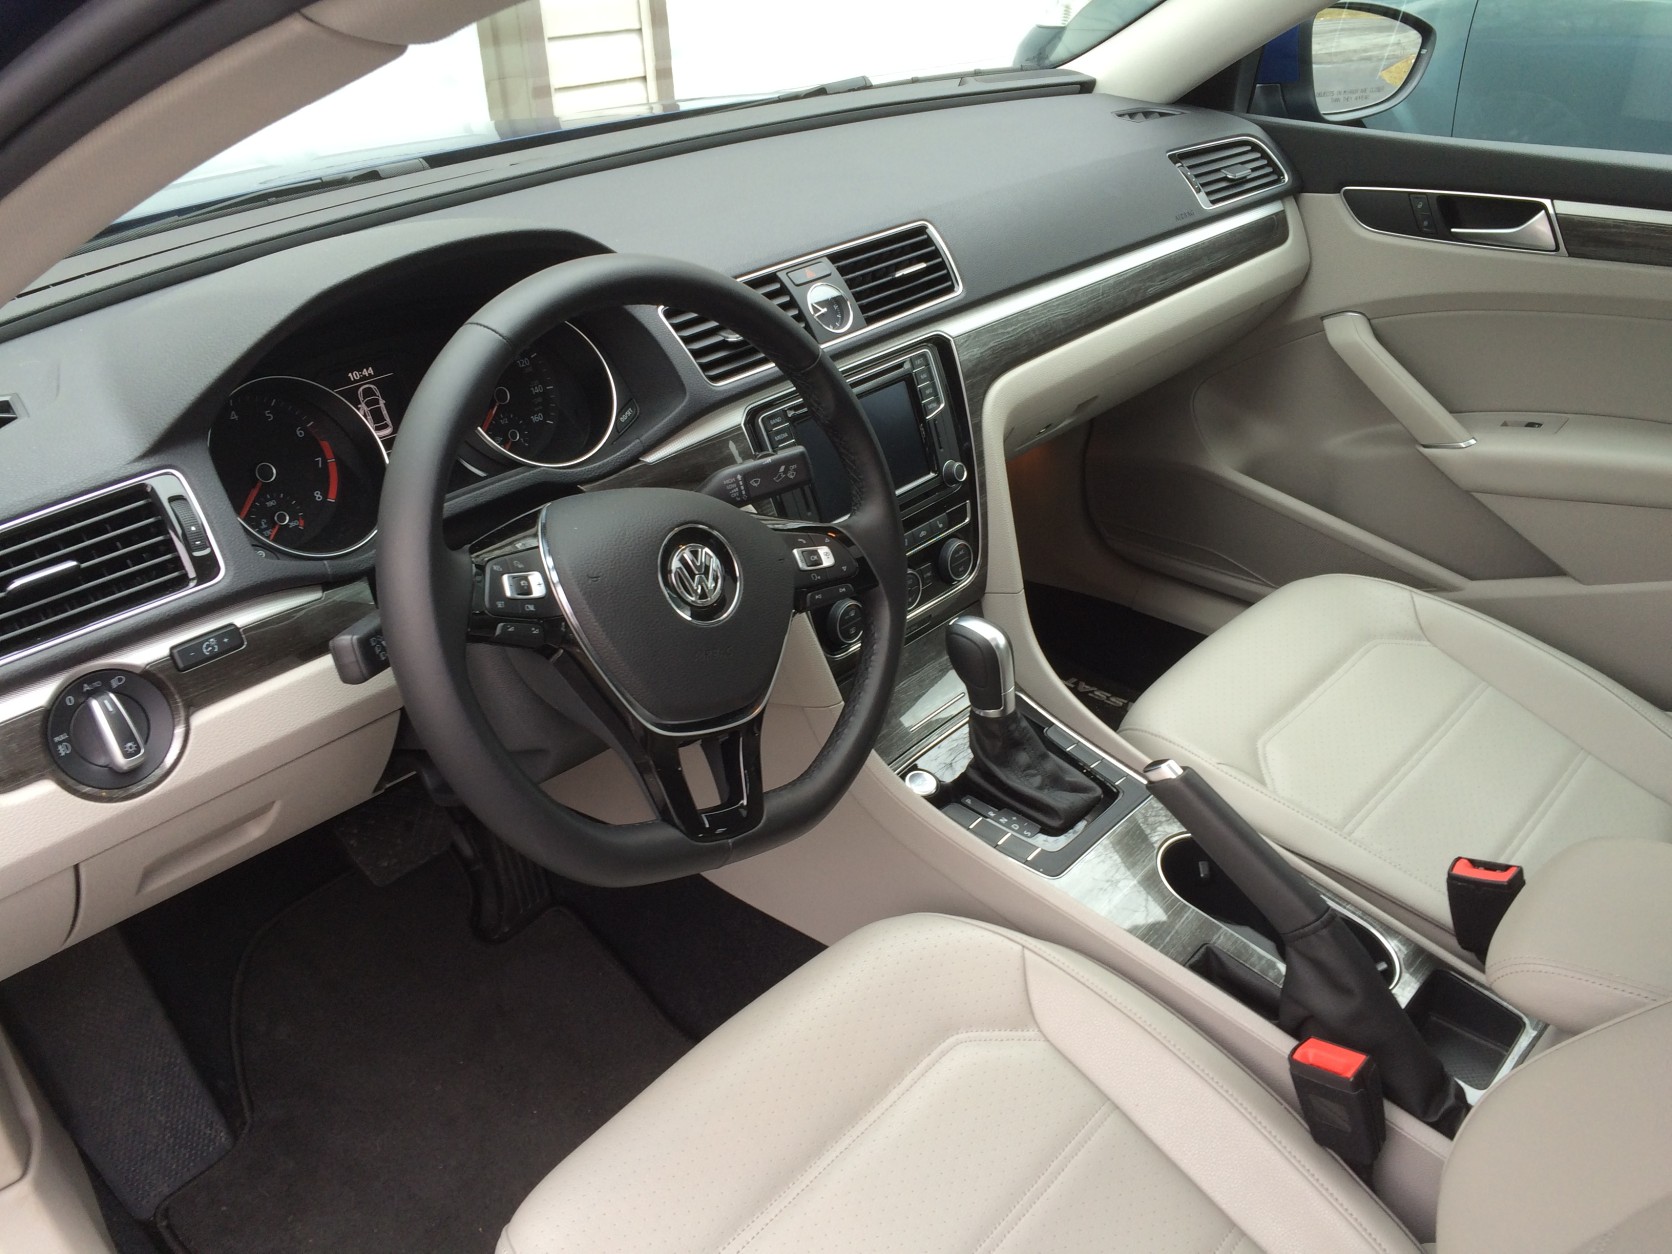 Inside is where you can tell there is change for the better for the VW’s Passats. (WTOP/Mike Parris)